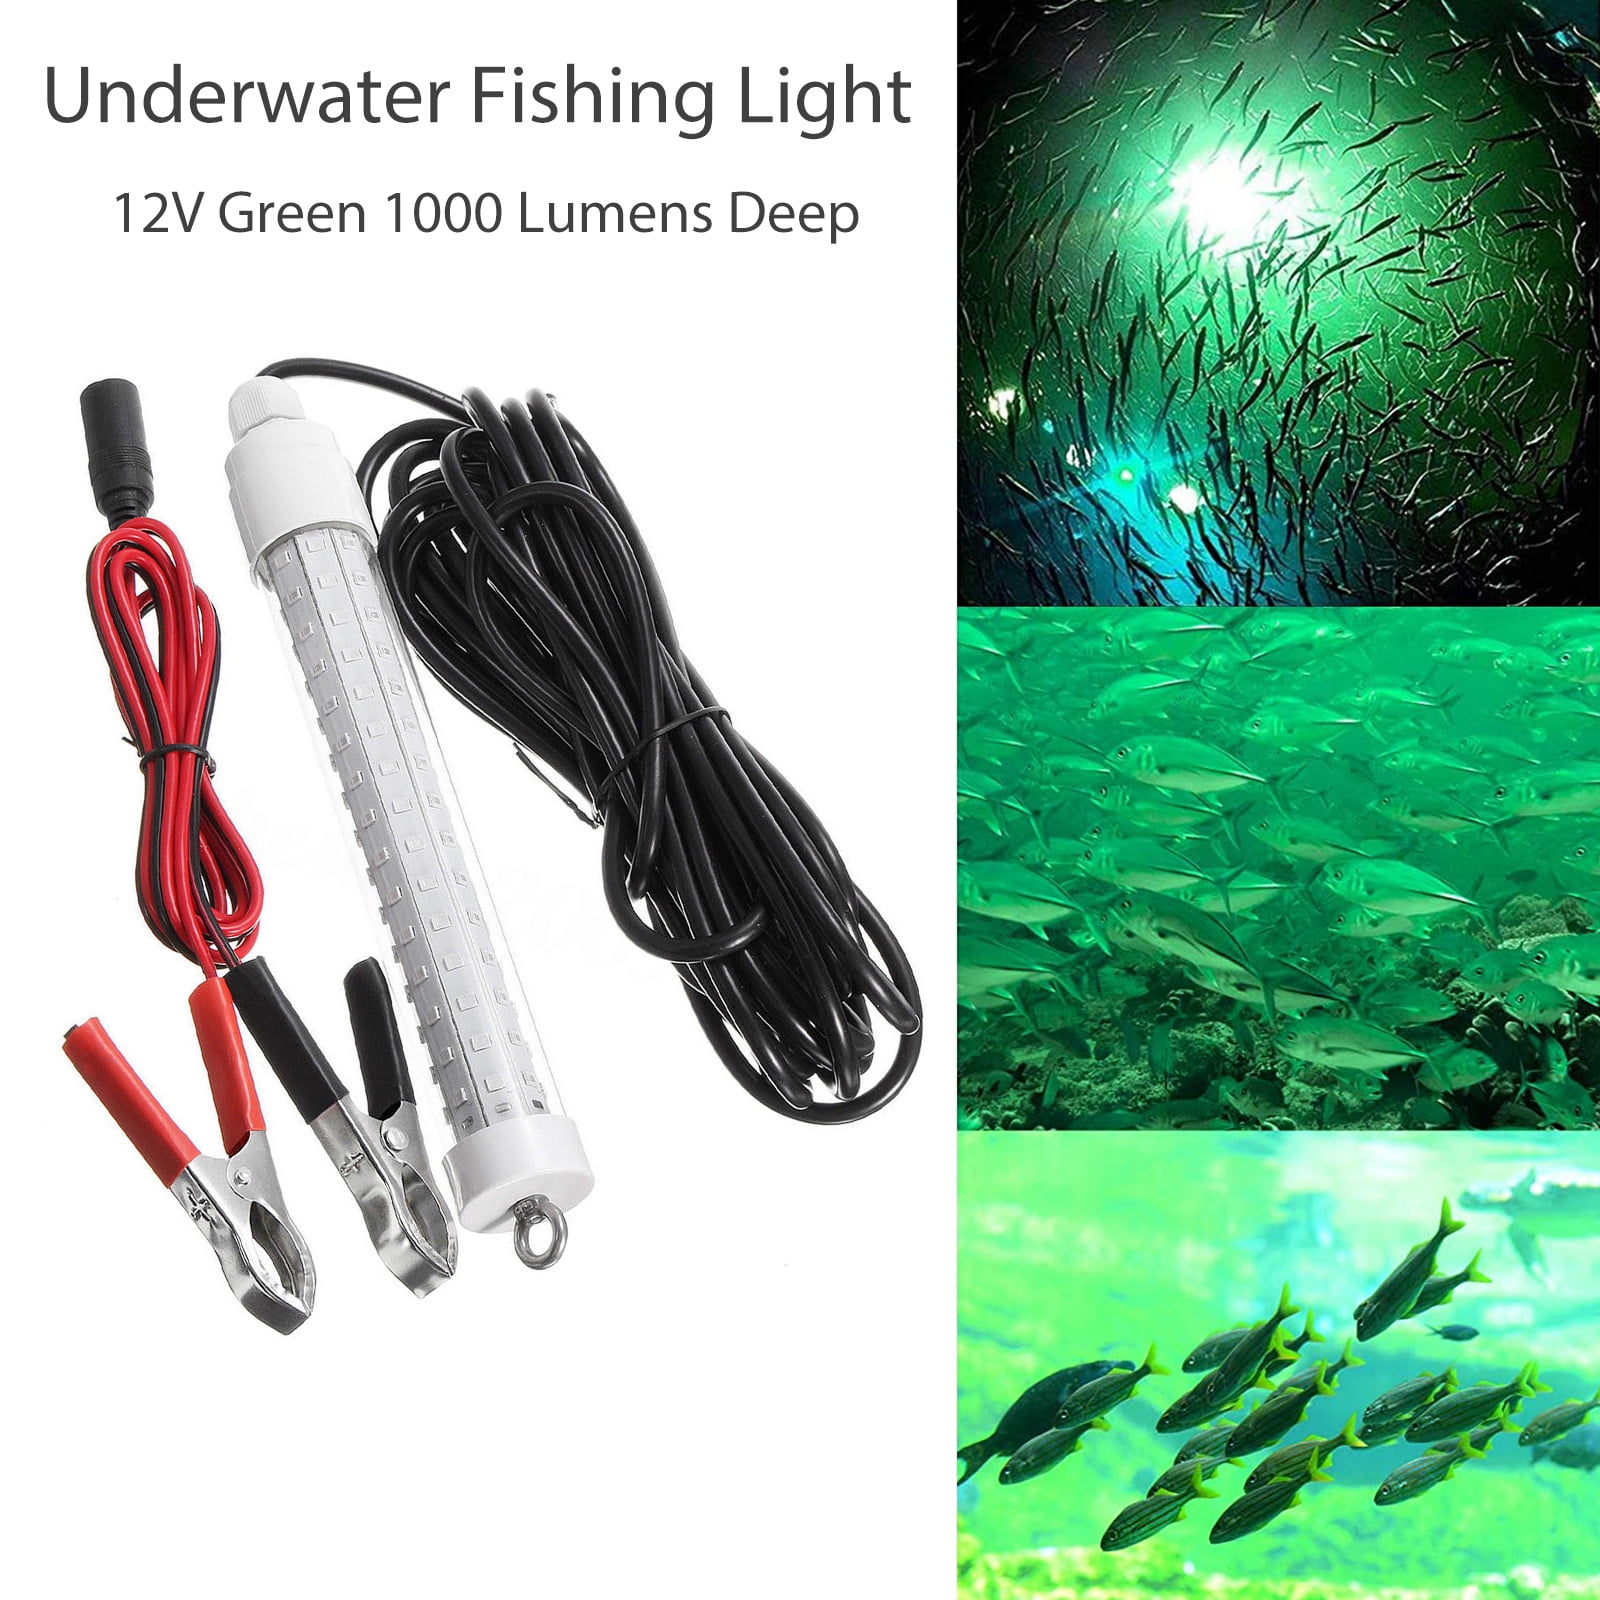 12V LED GREEN UNDERWATER SUBMERSIBLE NIGHT FISHING LIGHT crappie shad squid boat 